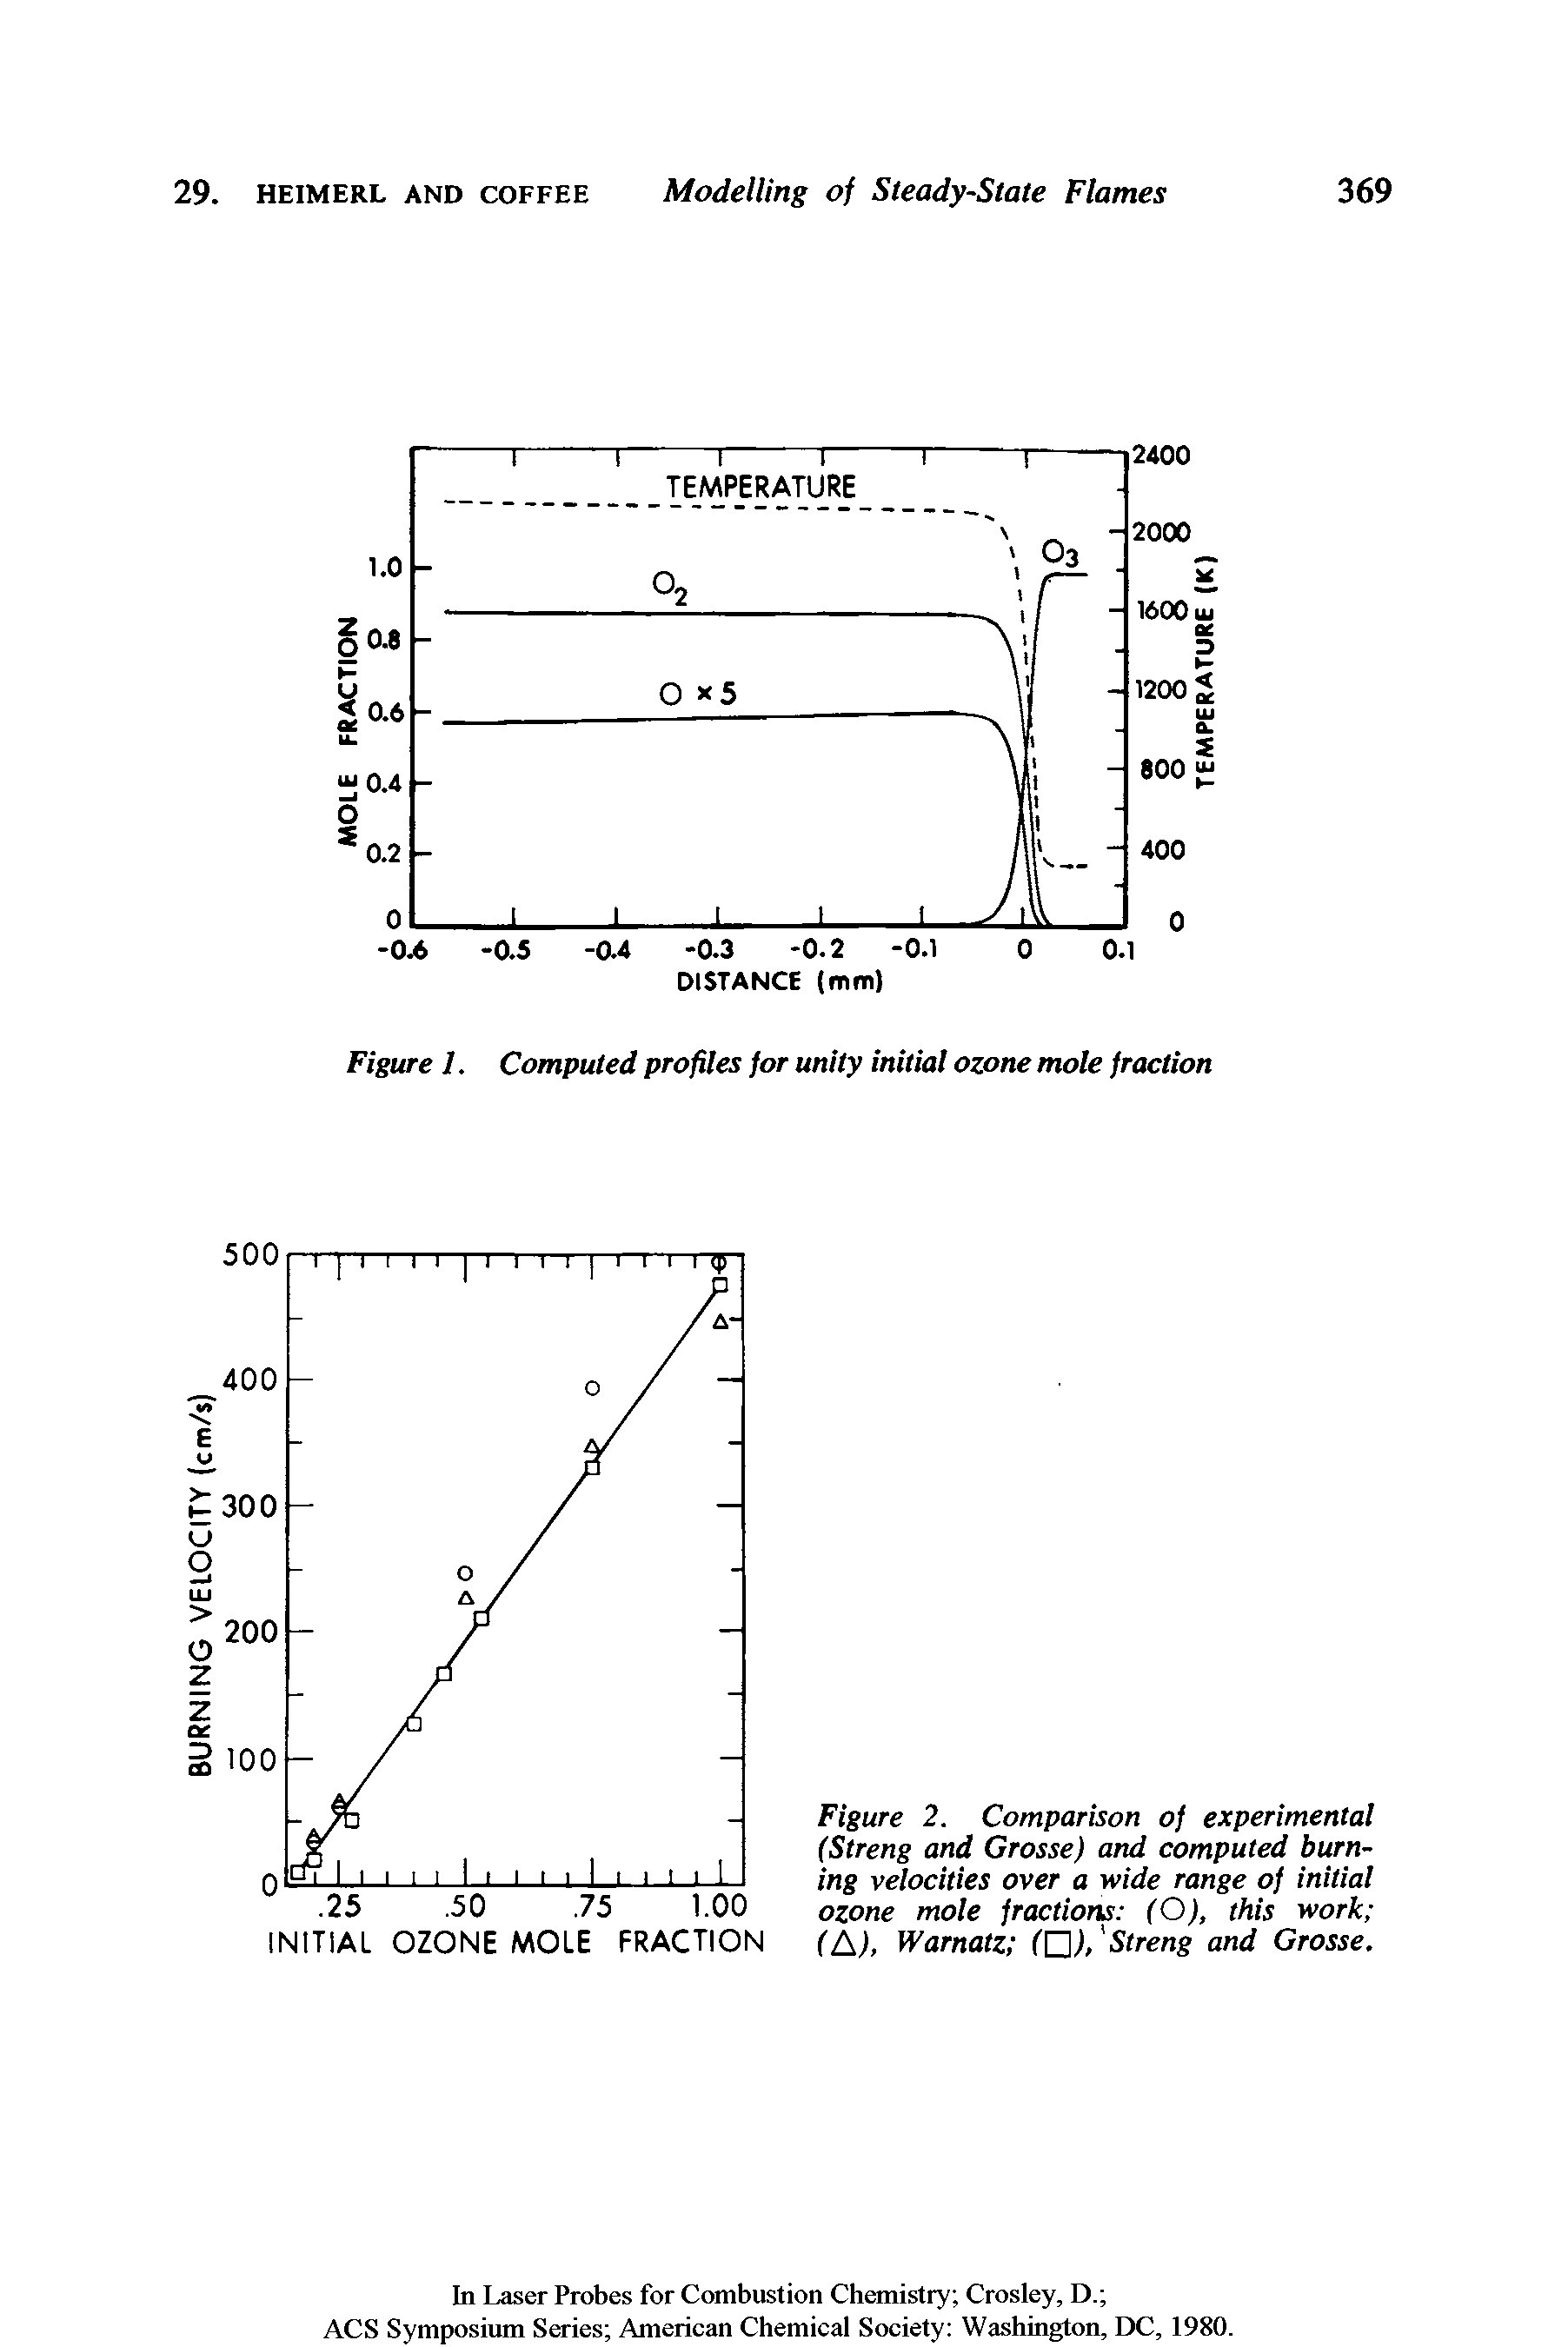 Figure 1. Computed profiles for unity initial ozone mole fraction...